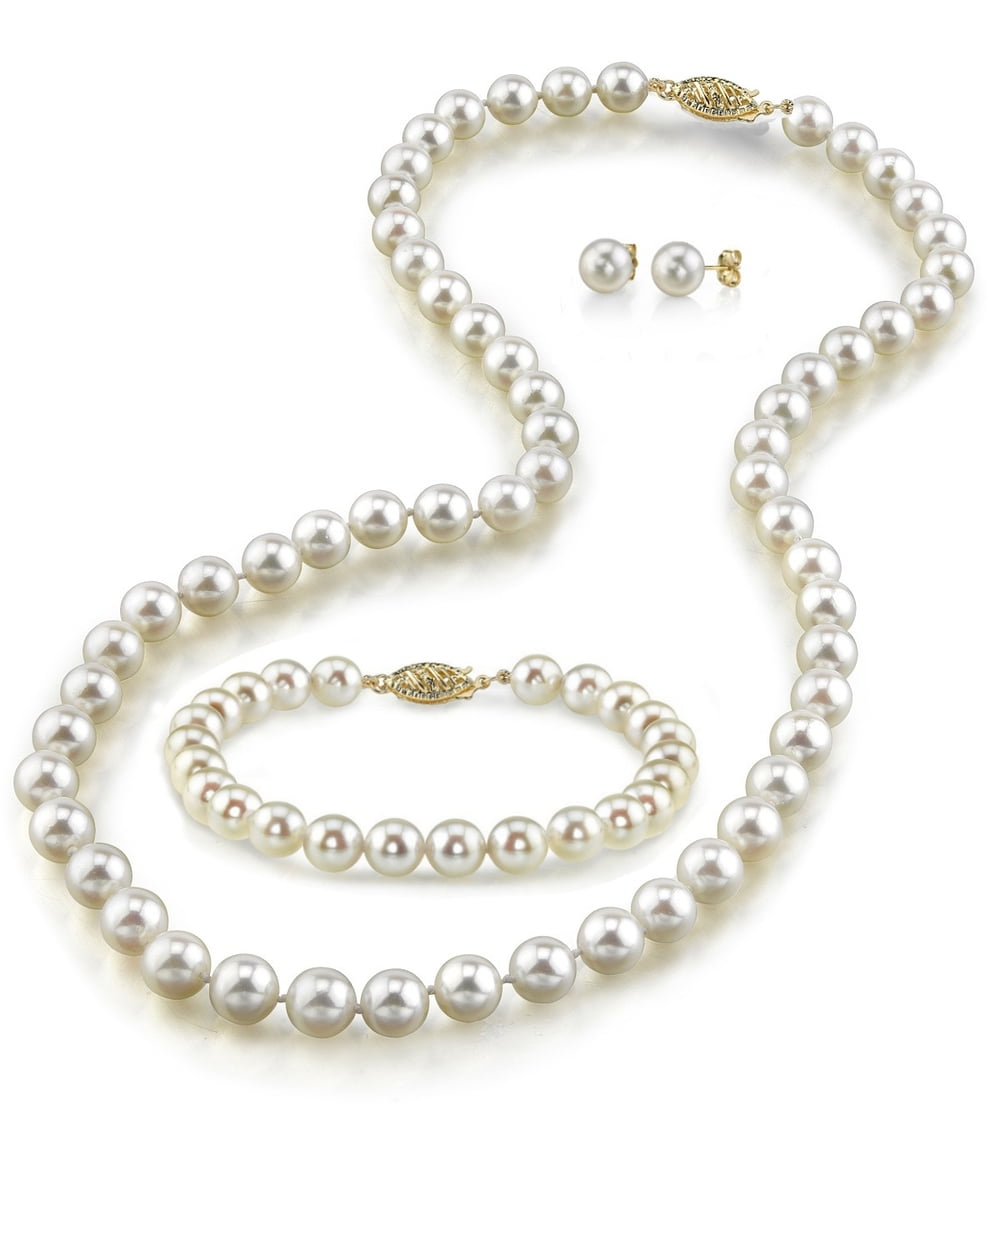 6-7mm 14k Gold AAA Quality High Luster White Freshwater Cultured Pearl Necklace